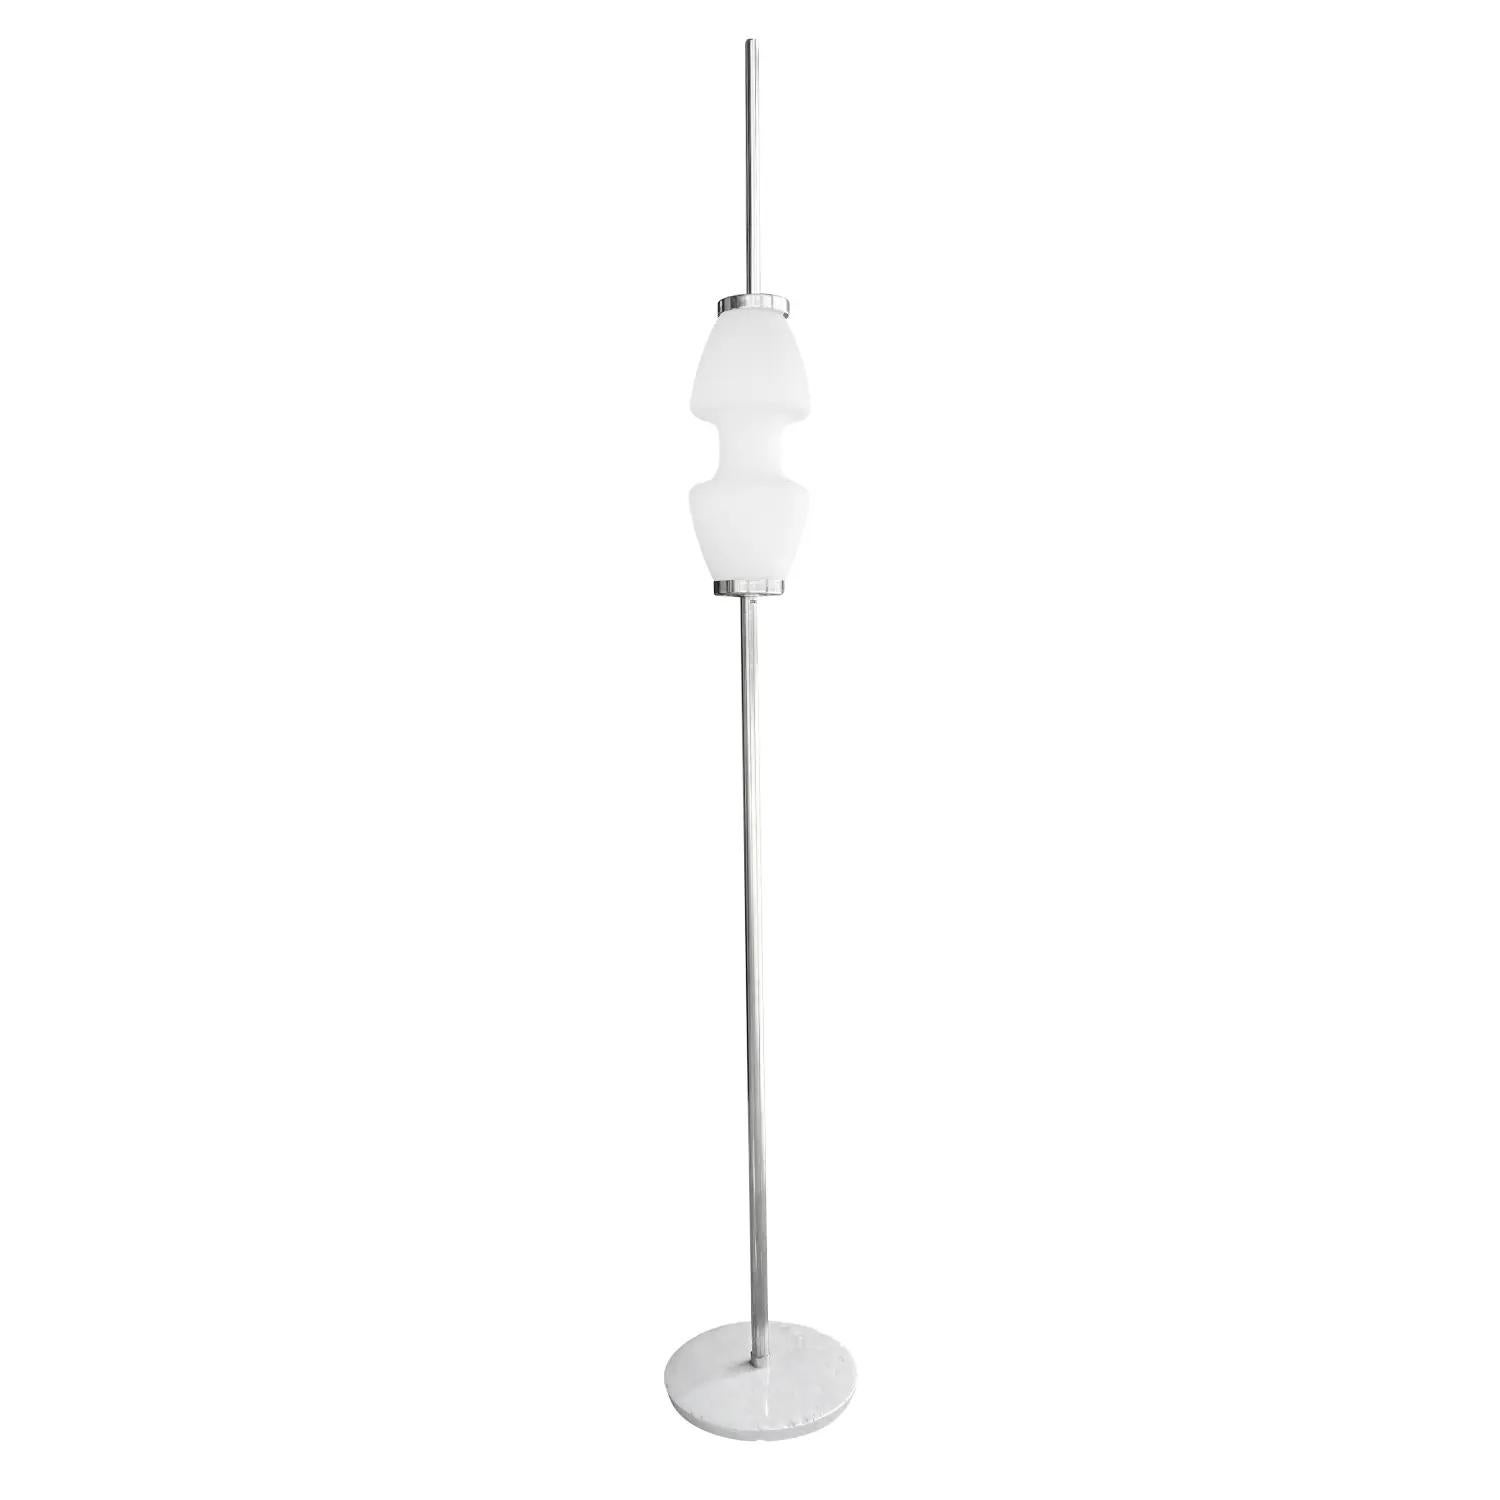 Hand-Crafted 20th Century Italian Mid-Century Modern Marble, Frosted Opaline Glass Floor Lamp For Sale